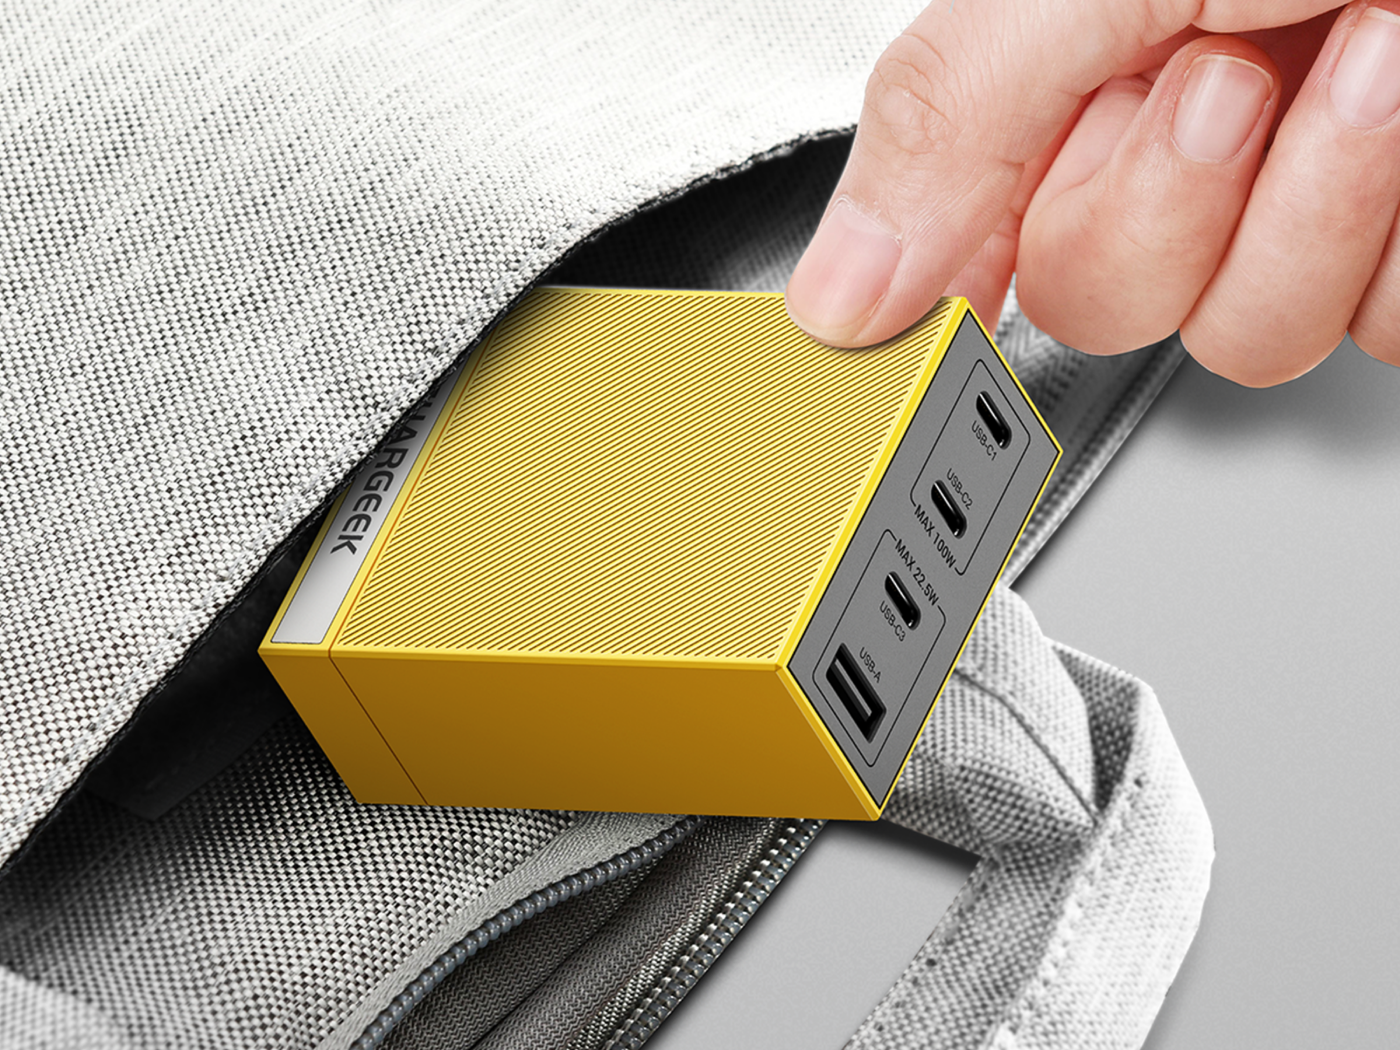 SHARGEEK TRAVEL FRIENDLY DESIGN CHARGER